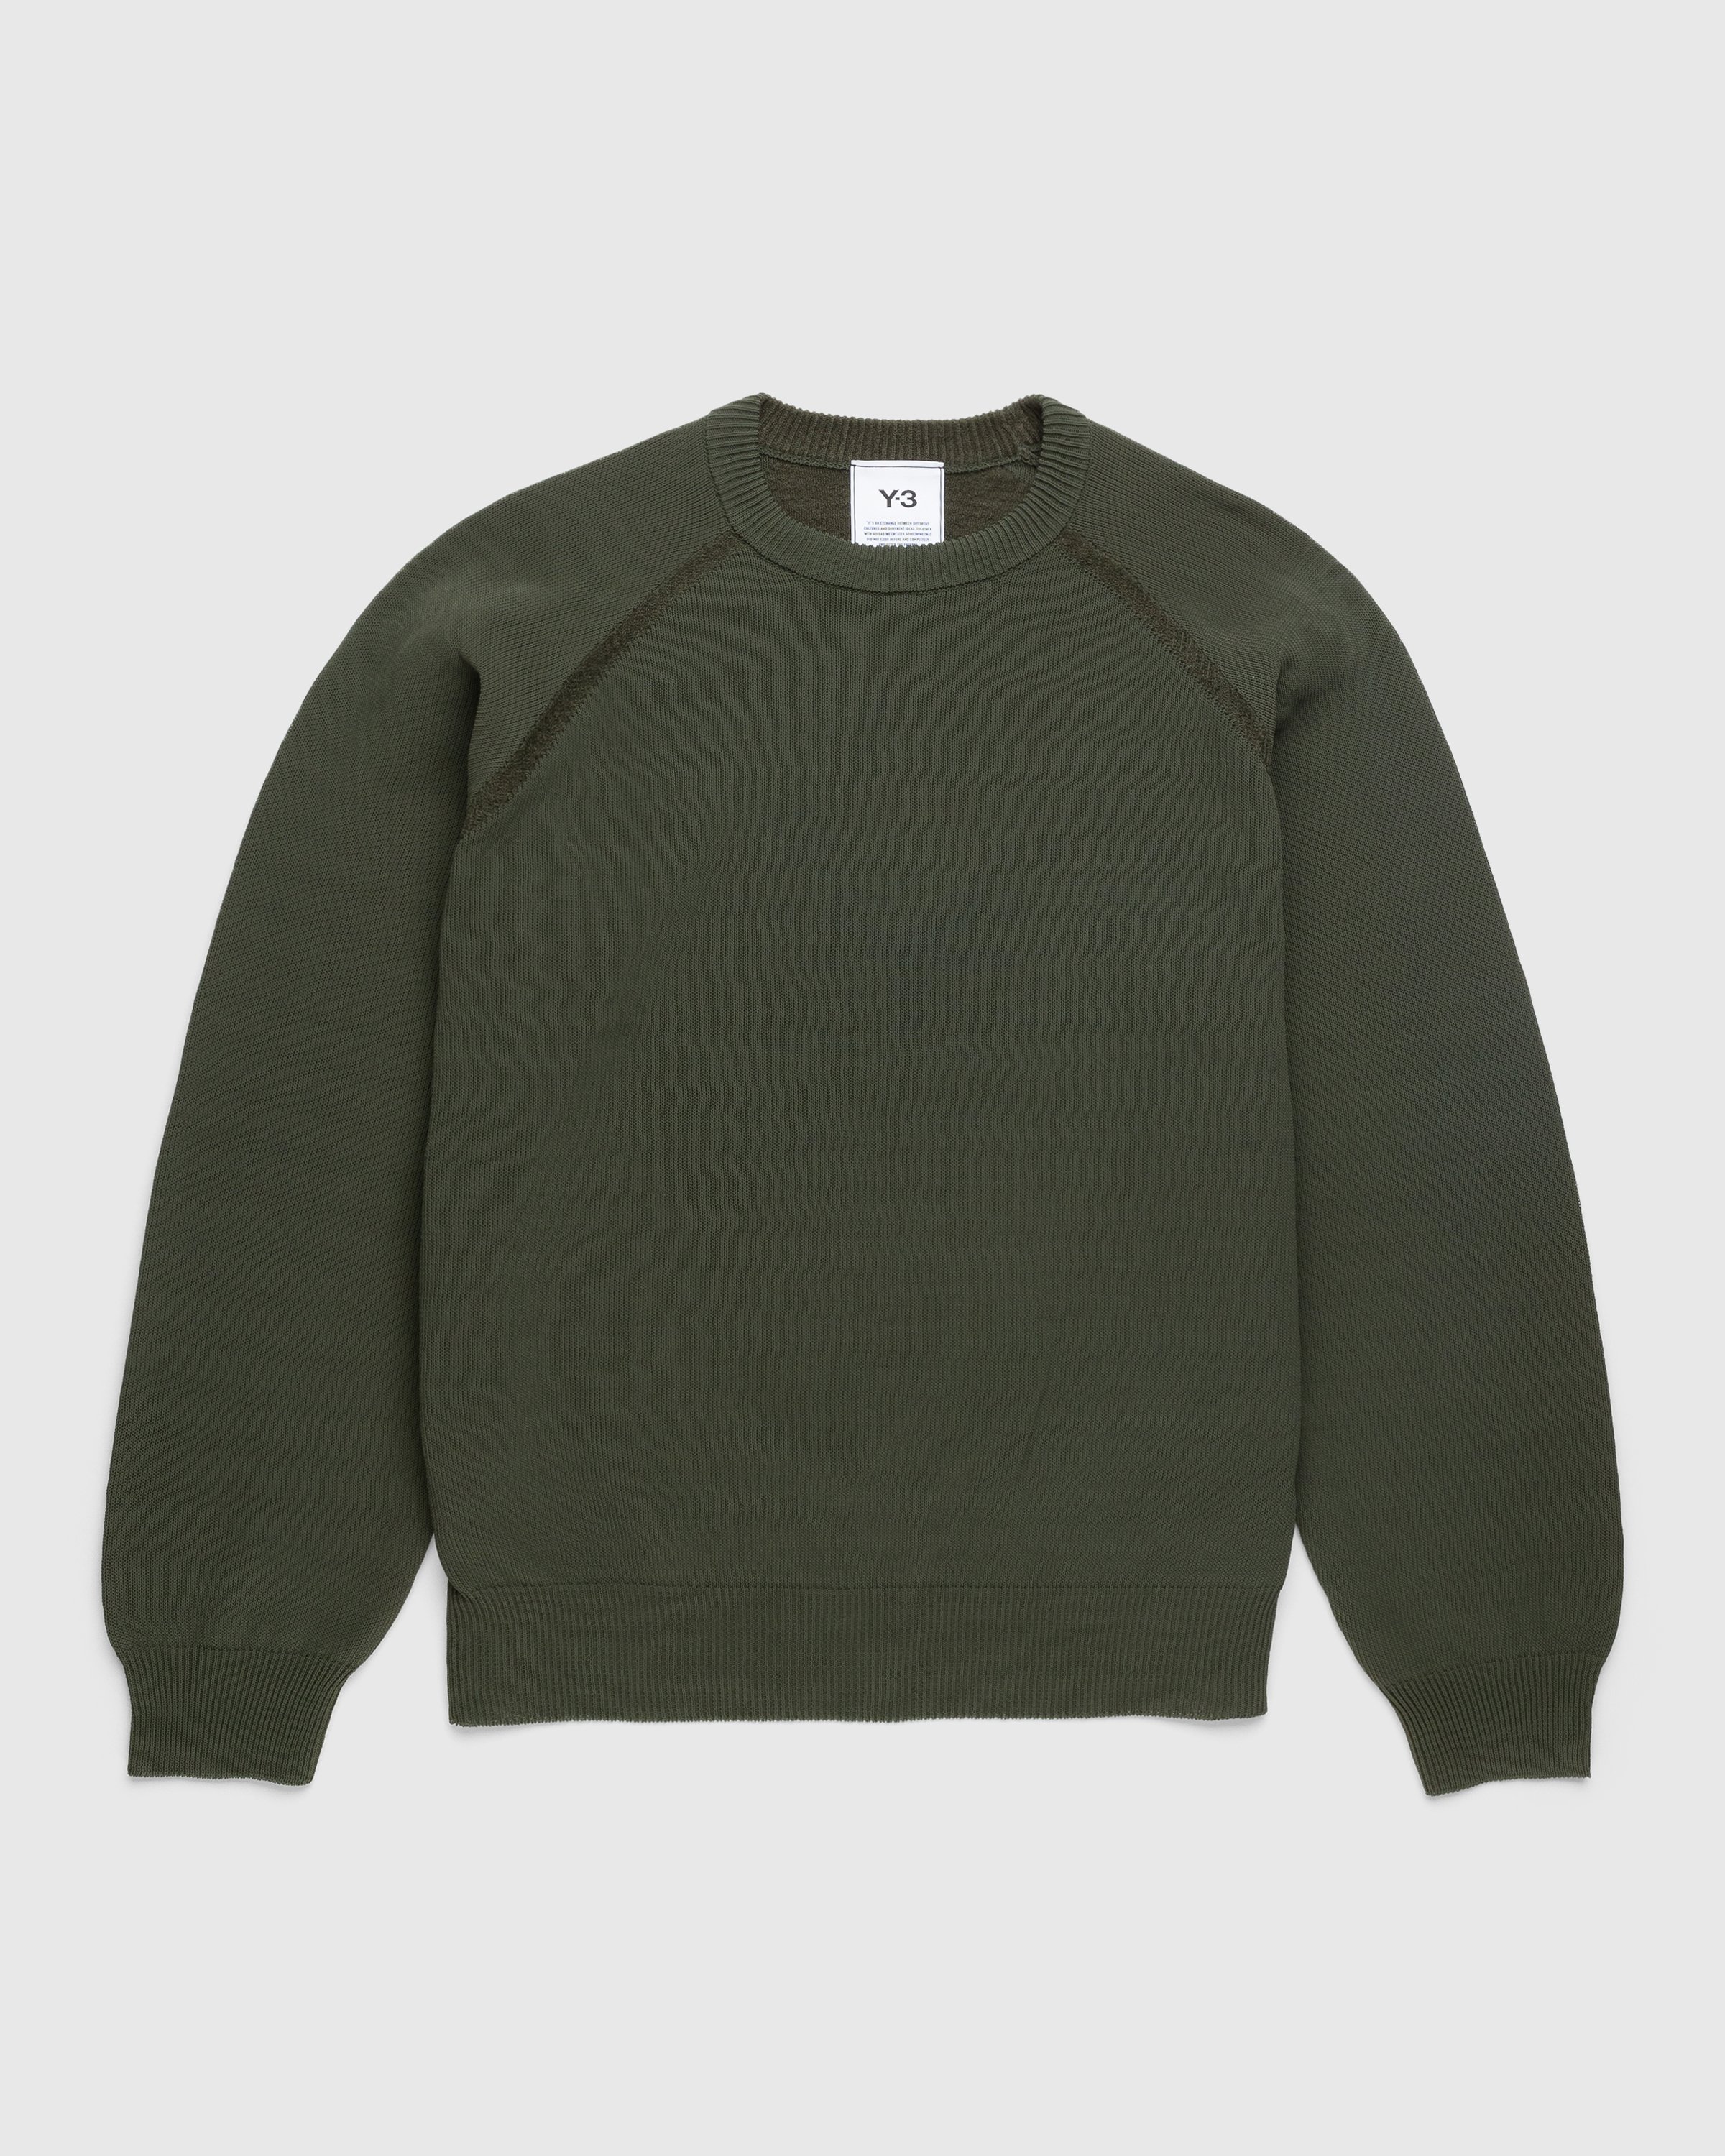 Y-3 - CL Knitted CR Sweater - Clothing - Green - Image 1